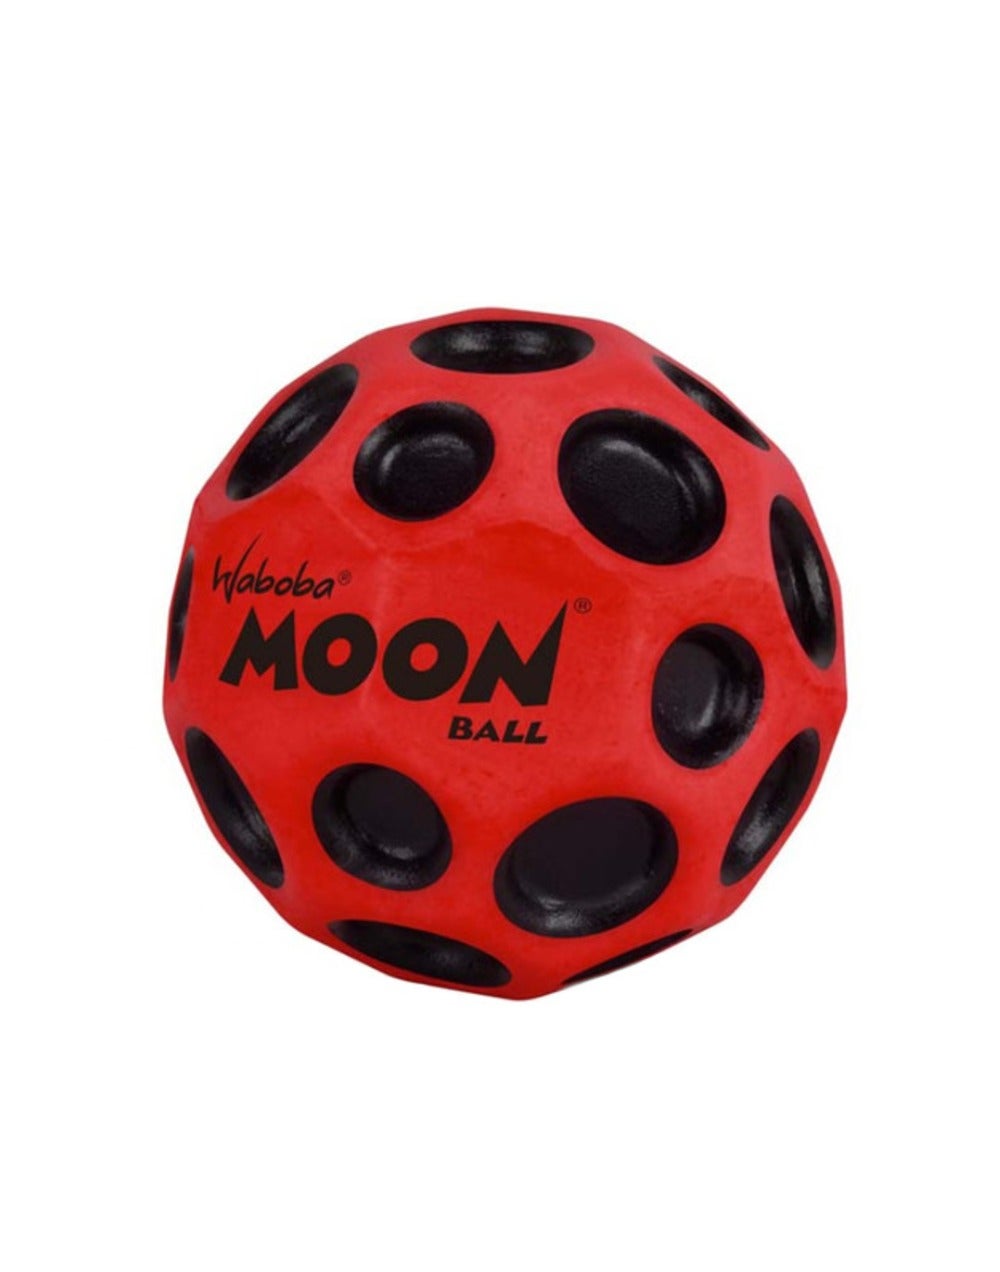 Waboba Moon Ball 20pc Display for sale online